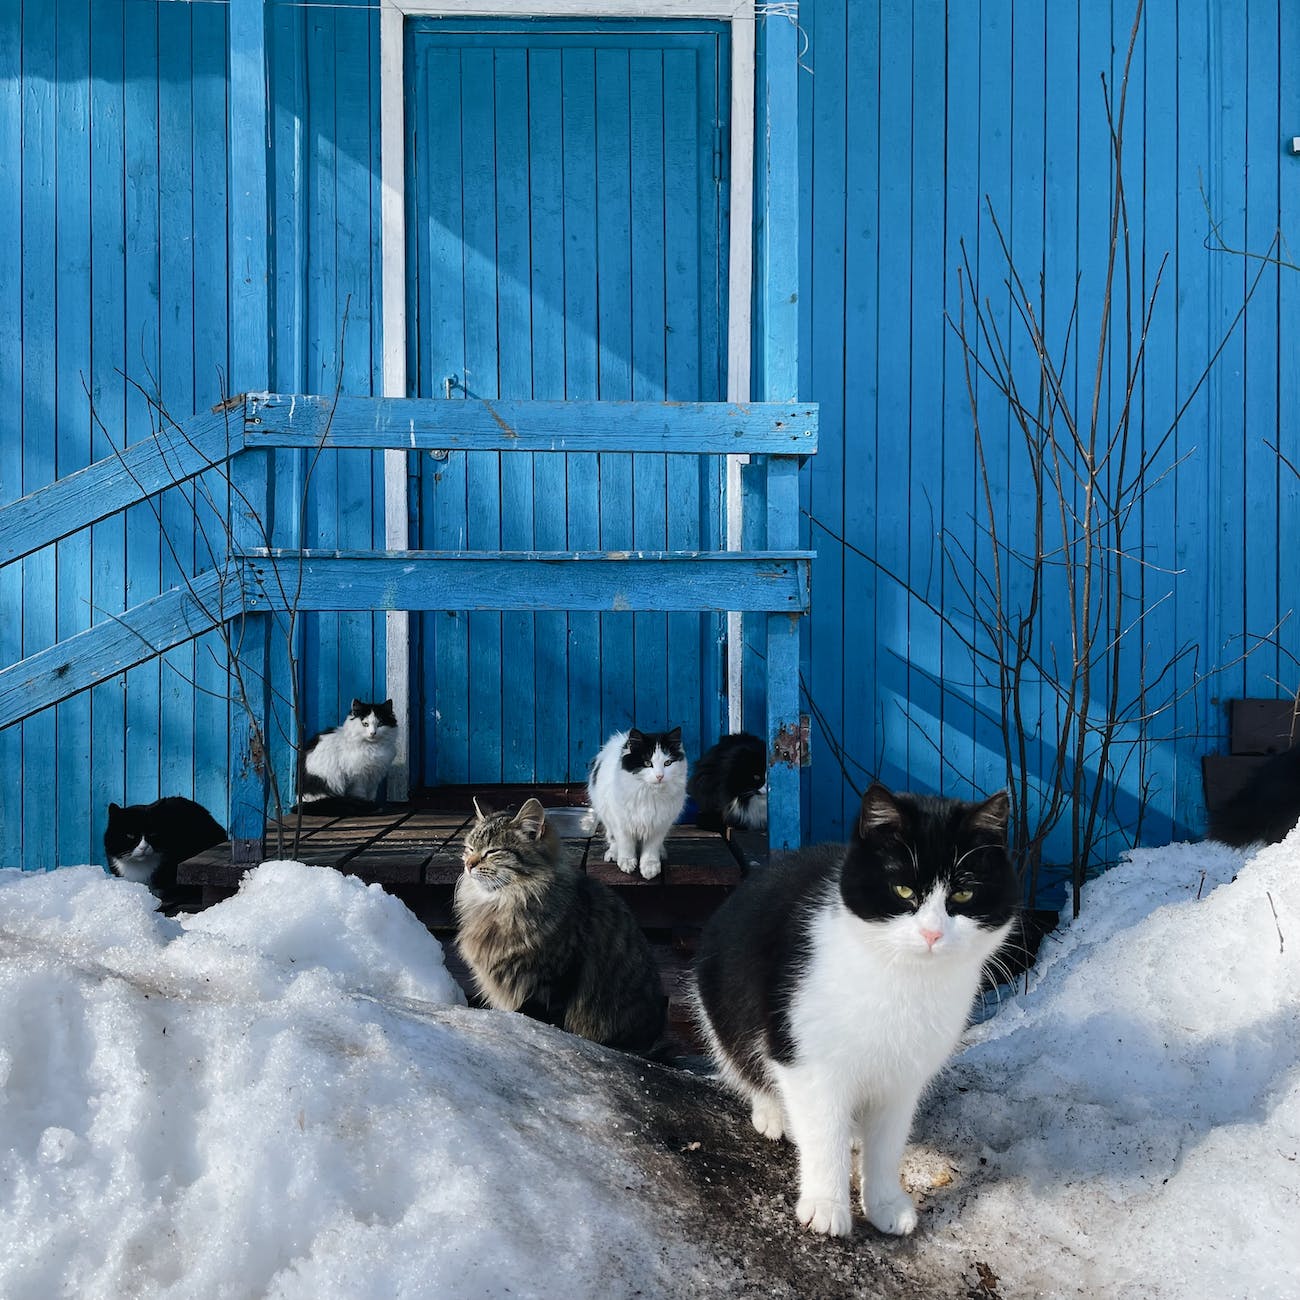 Photo by Alina Autumn on <a href="https://www.pexels.com/photo/flock-of-cats-with-timber-house-painted-blue-in-background-11551694/" rel="nofollow">Pexels.com</a>